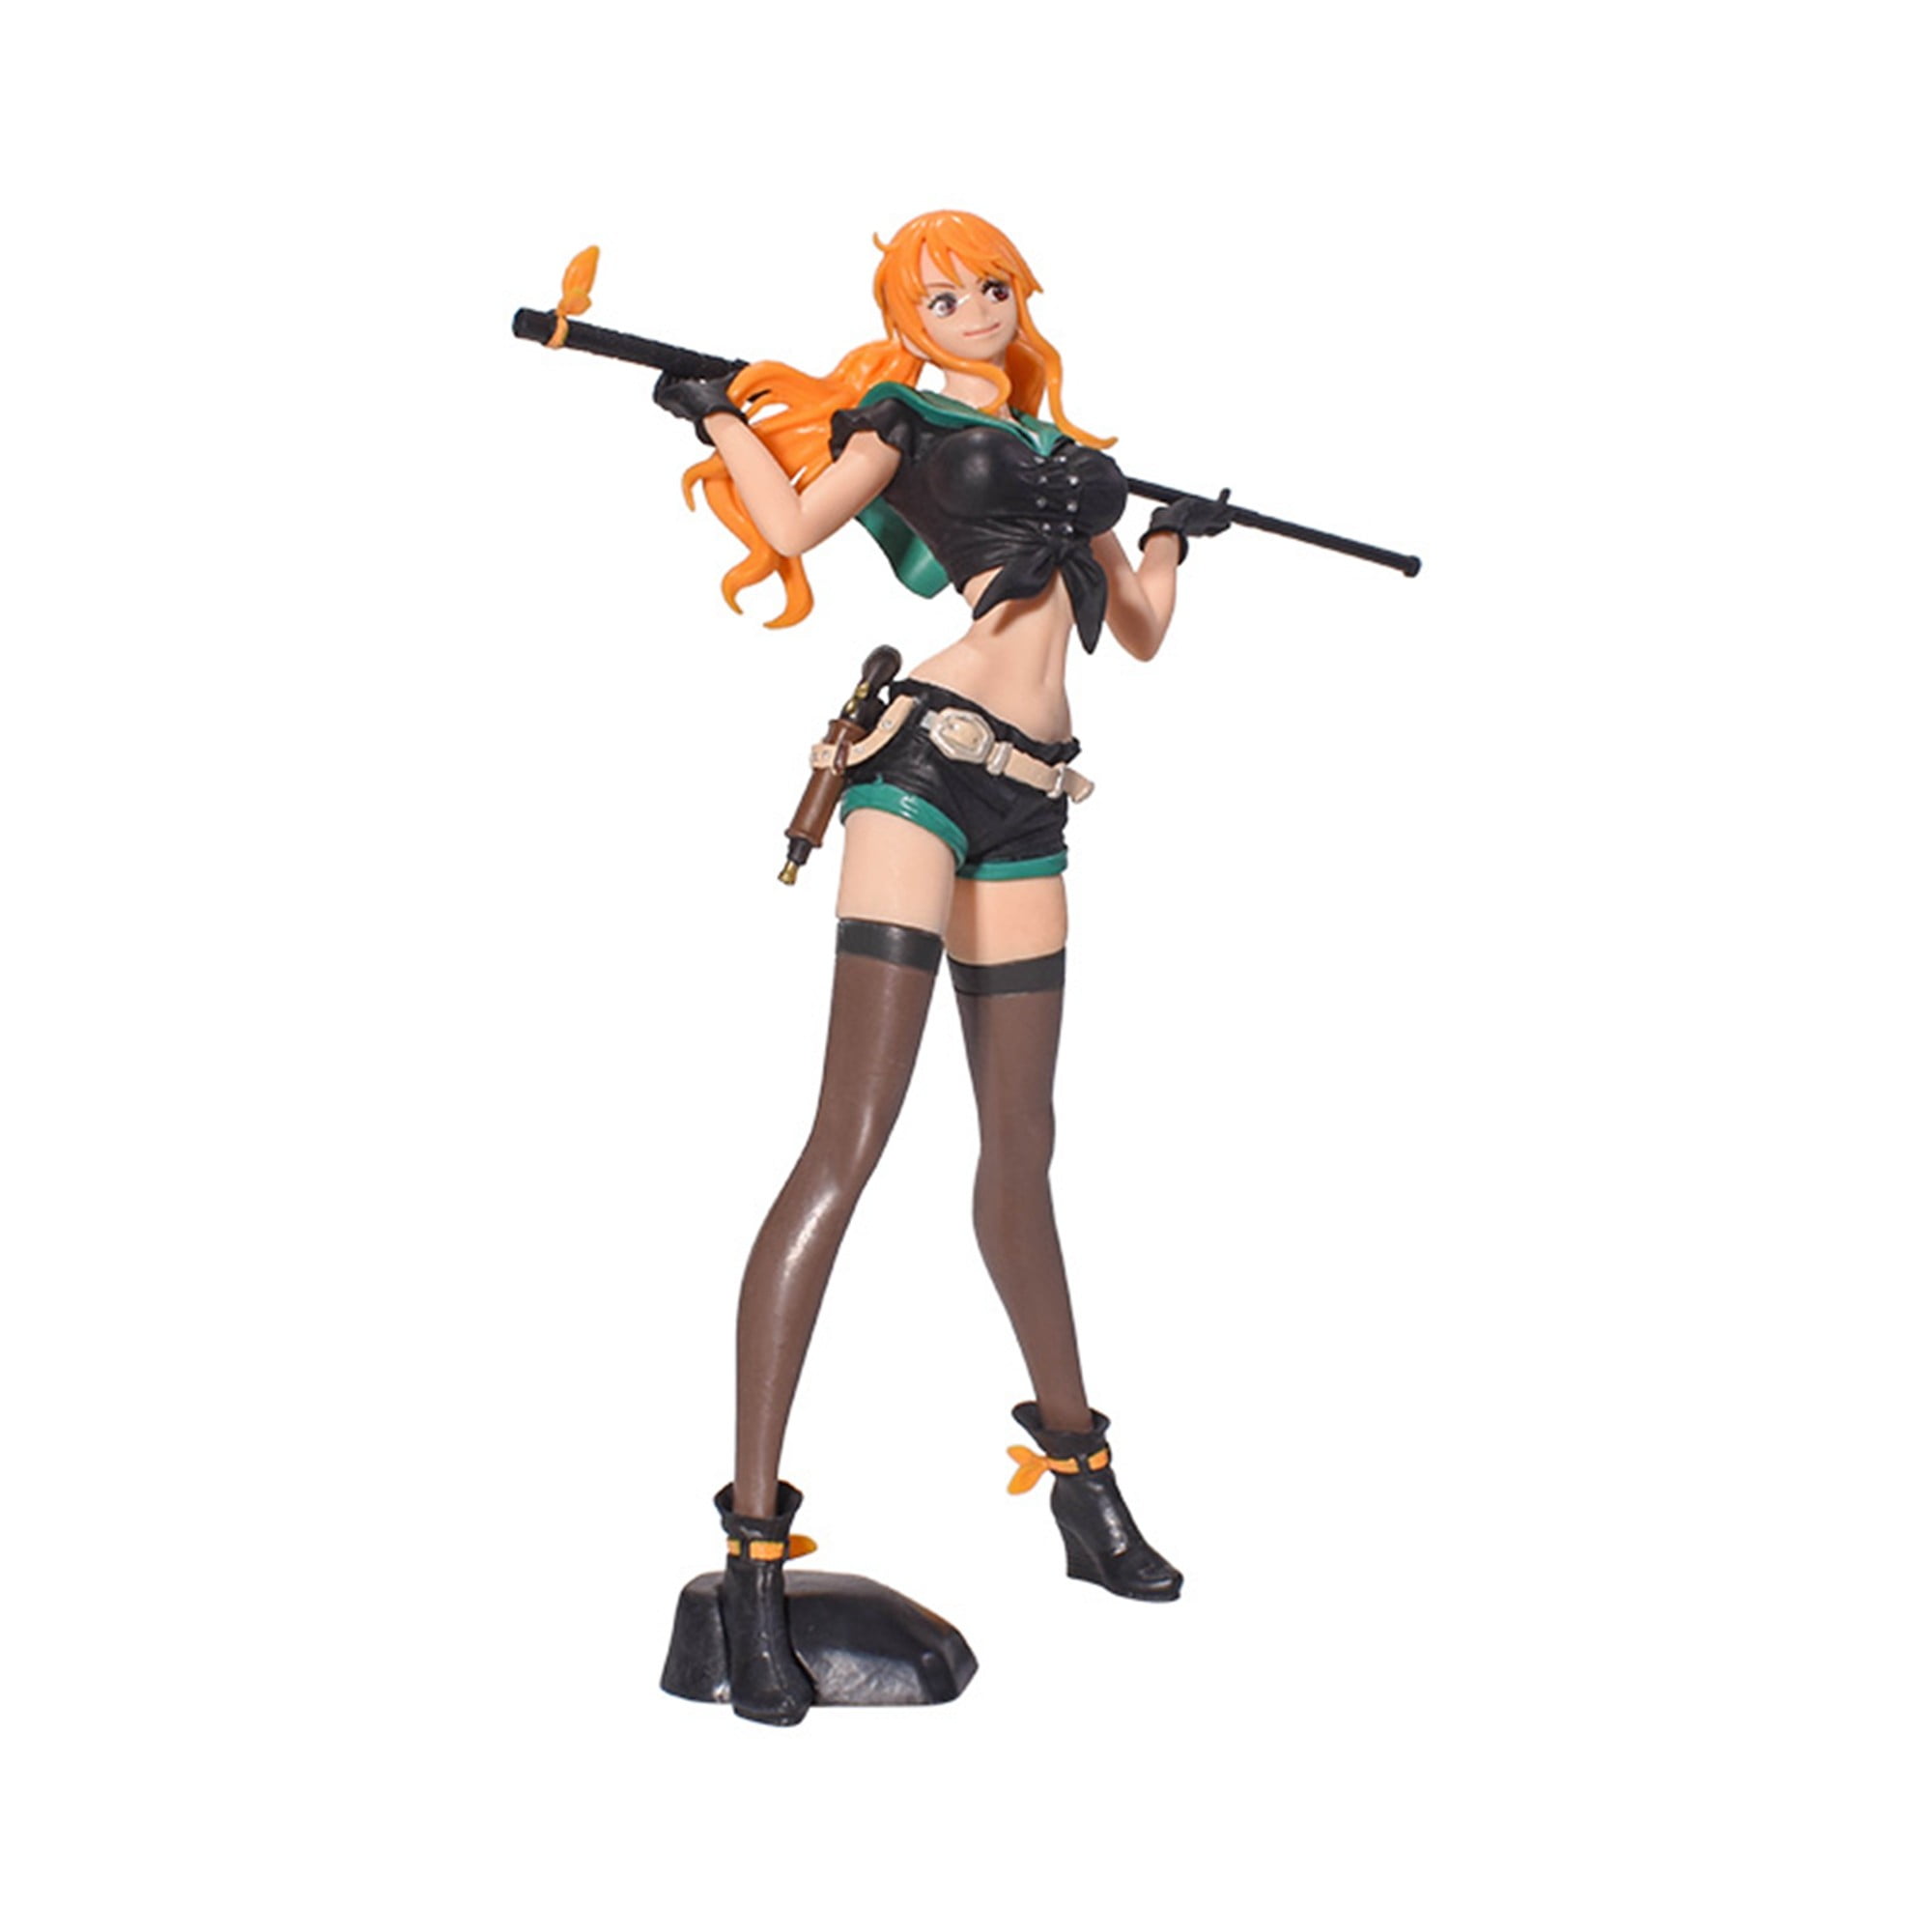 Mimimiao One Piece Boa·Hancock 14cm/5.5inch Cute Girl Q Version Doll Action Figure Anime Character Scene Model/Statue PVC Figures Animation Collectibles/Gifts/Toys Three Colors